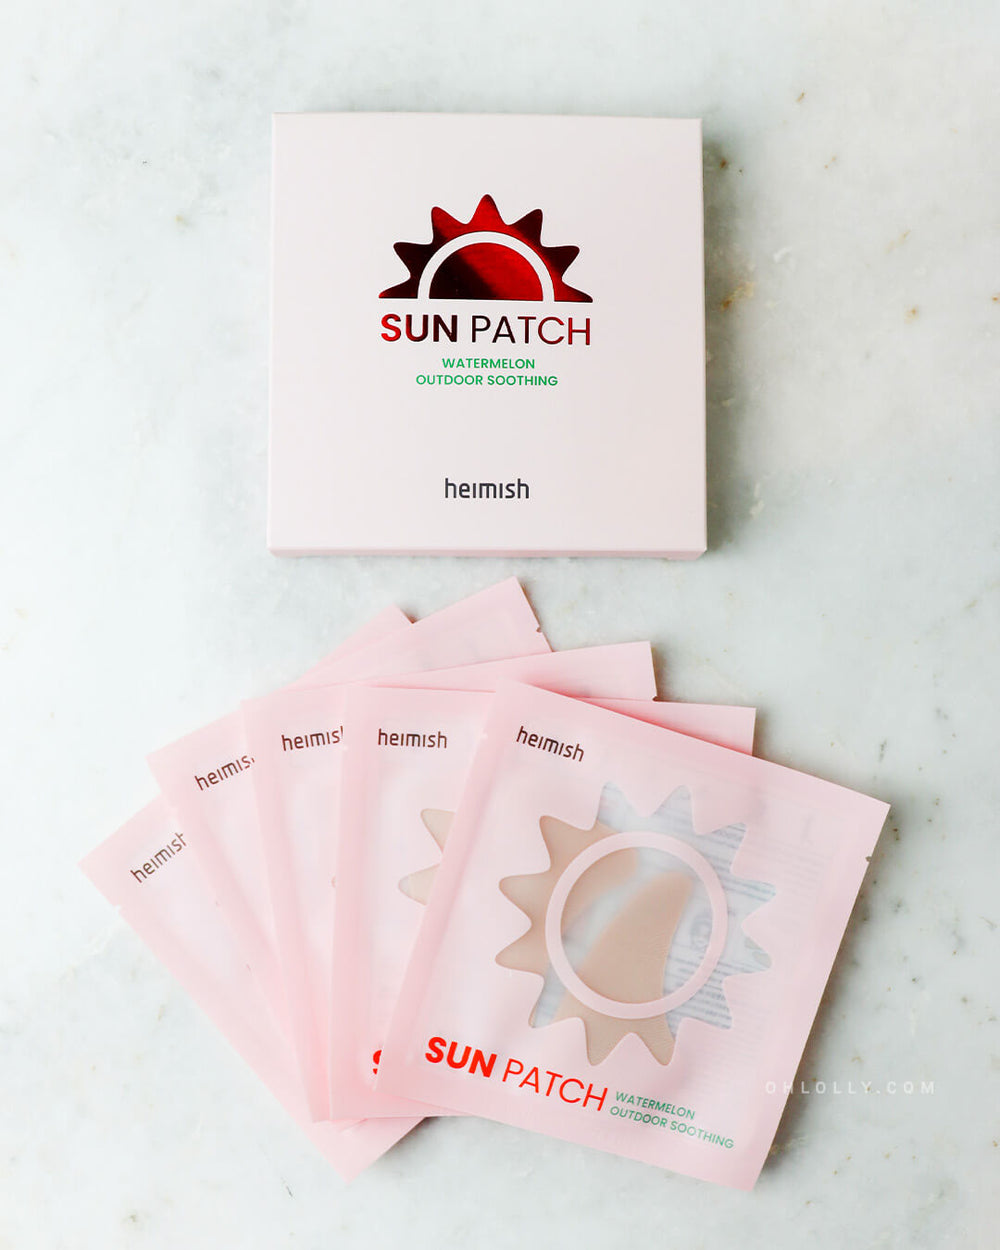 Watermelon Outdoor Soothing Sun Patch